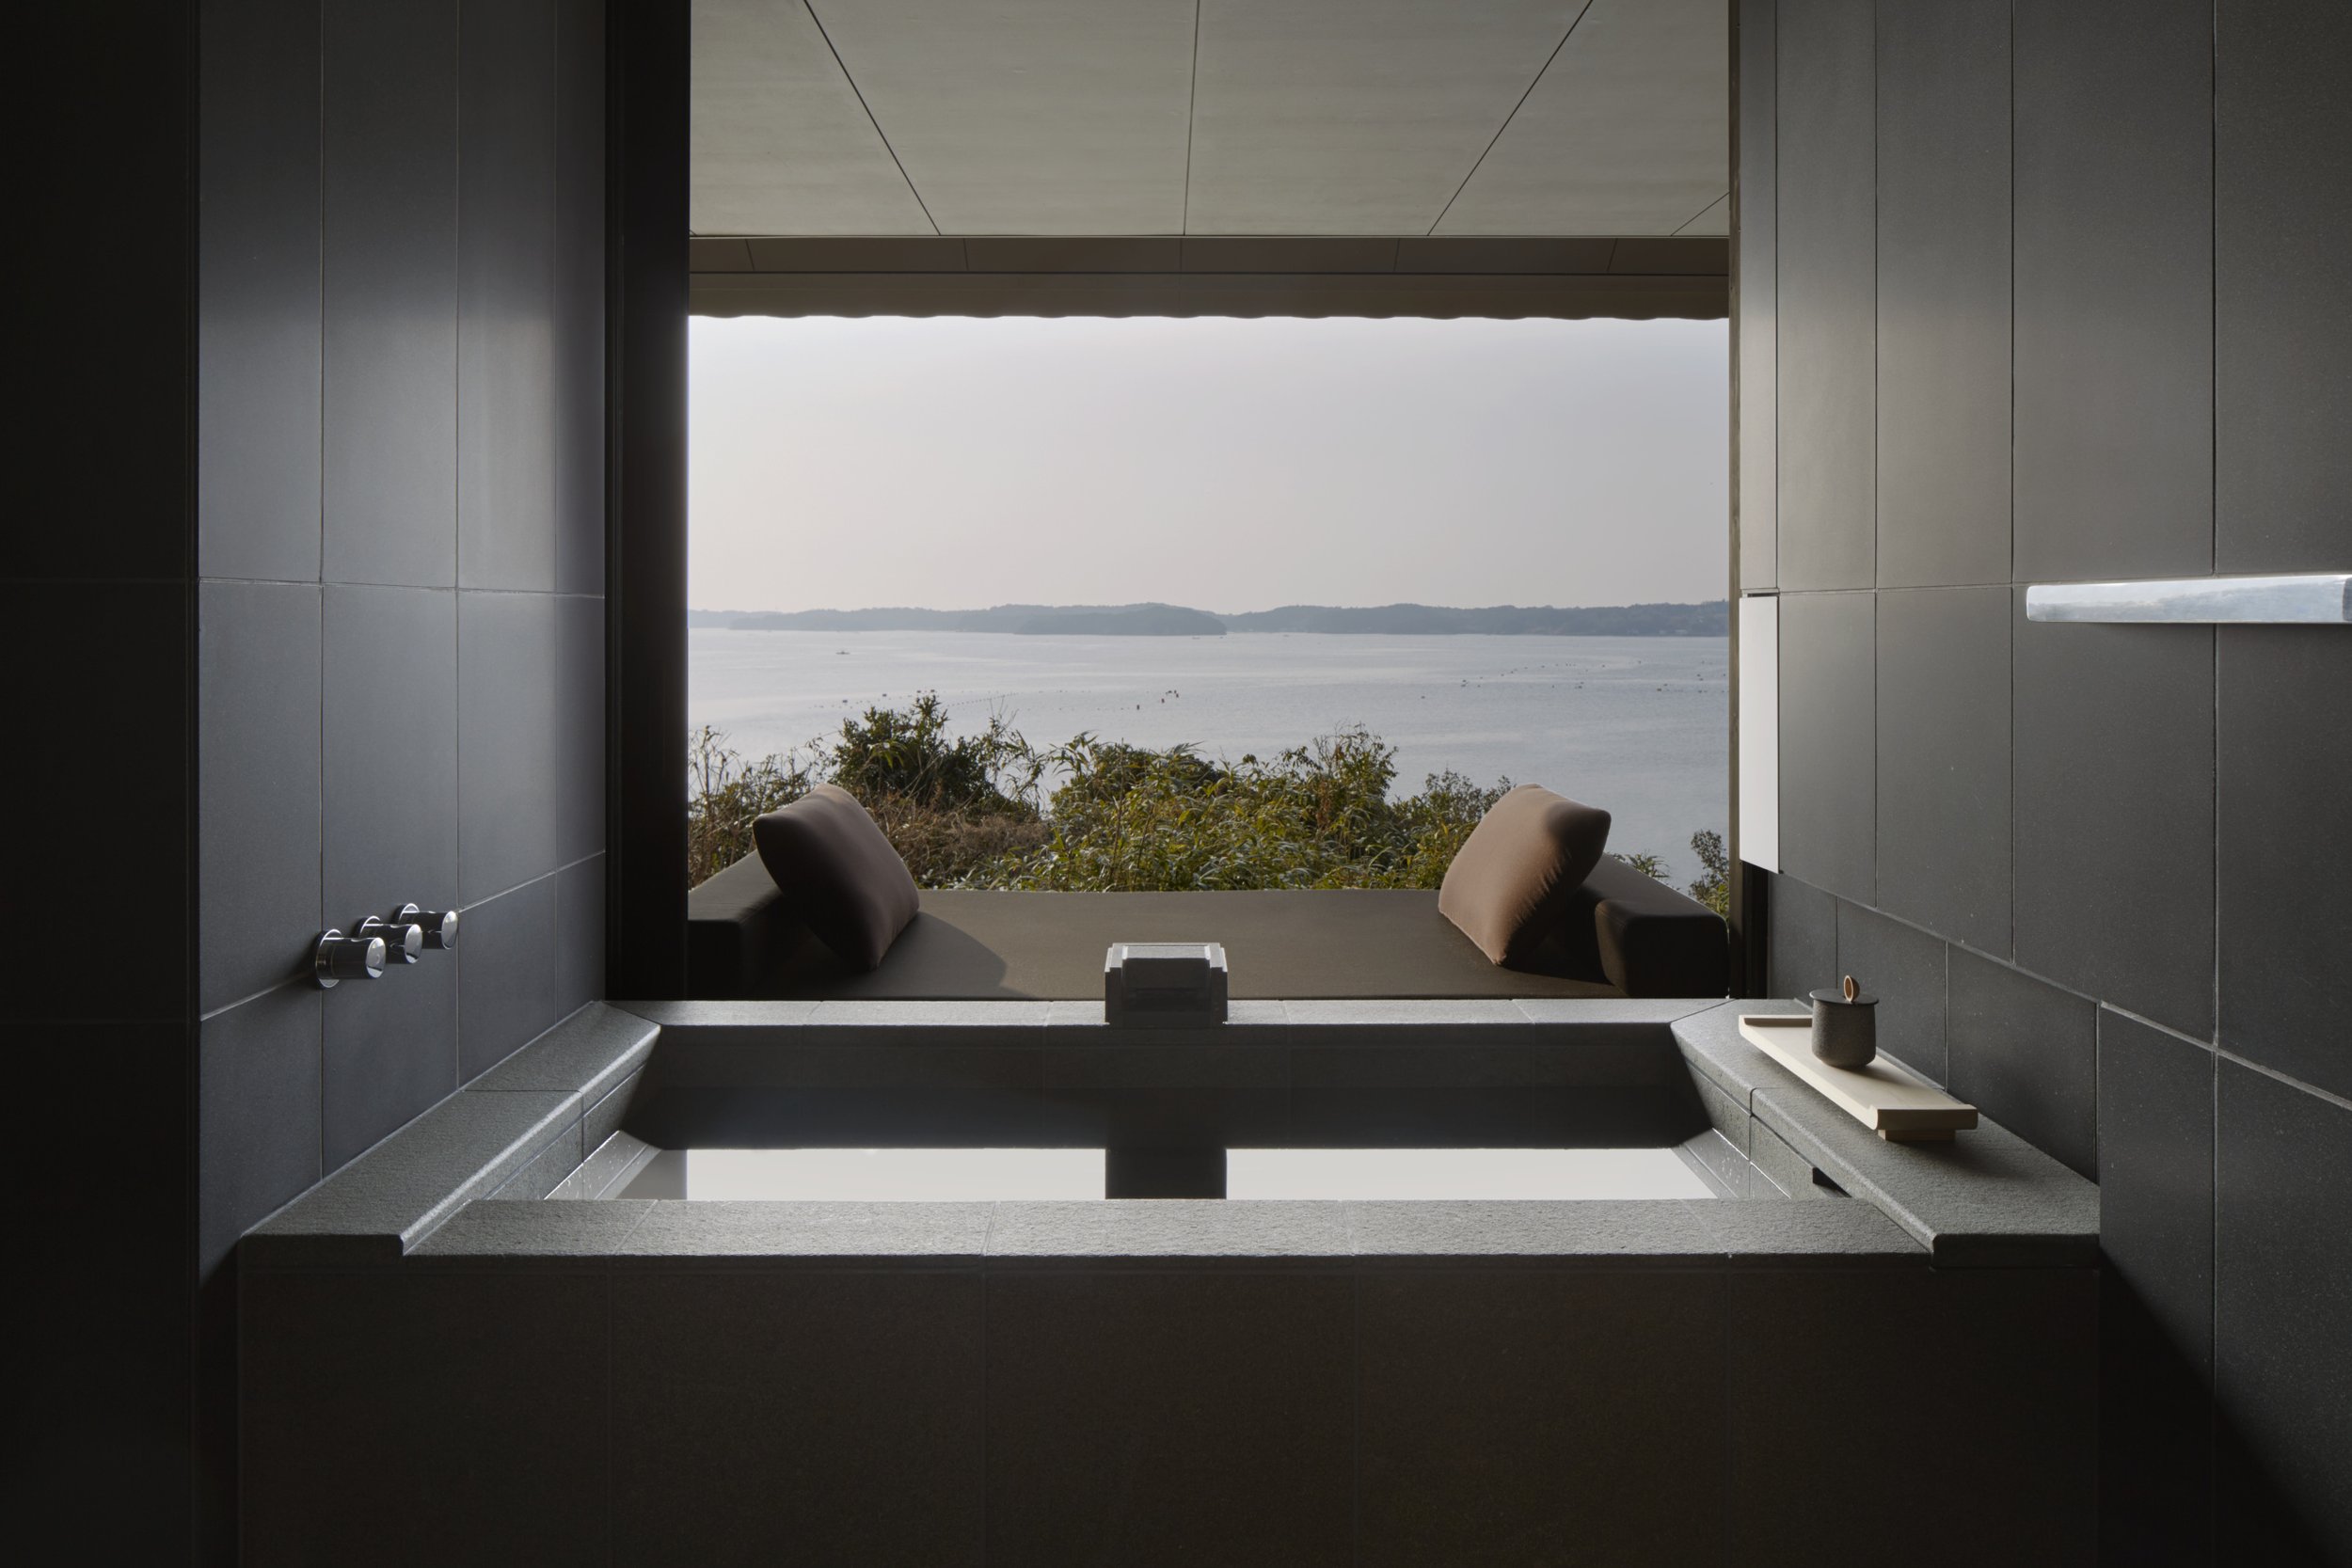  Onsen bath detail with full views over Ago Bay 